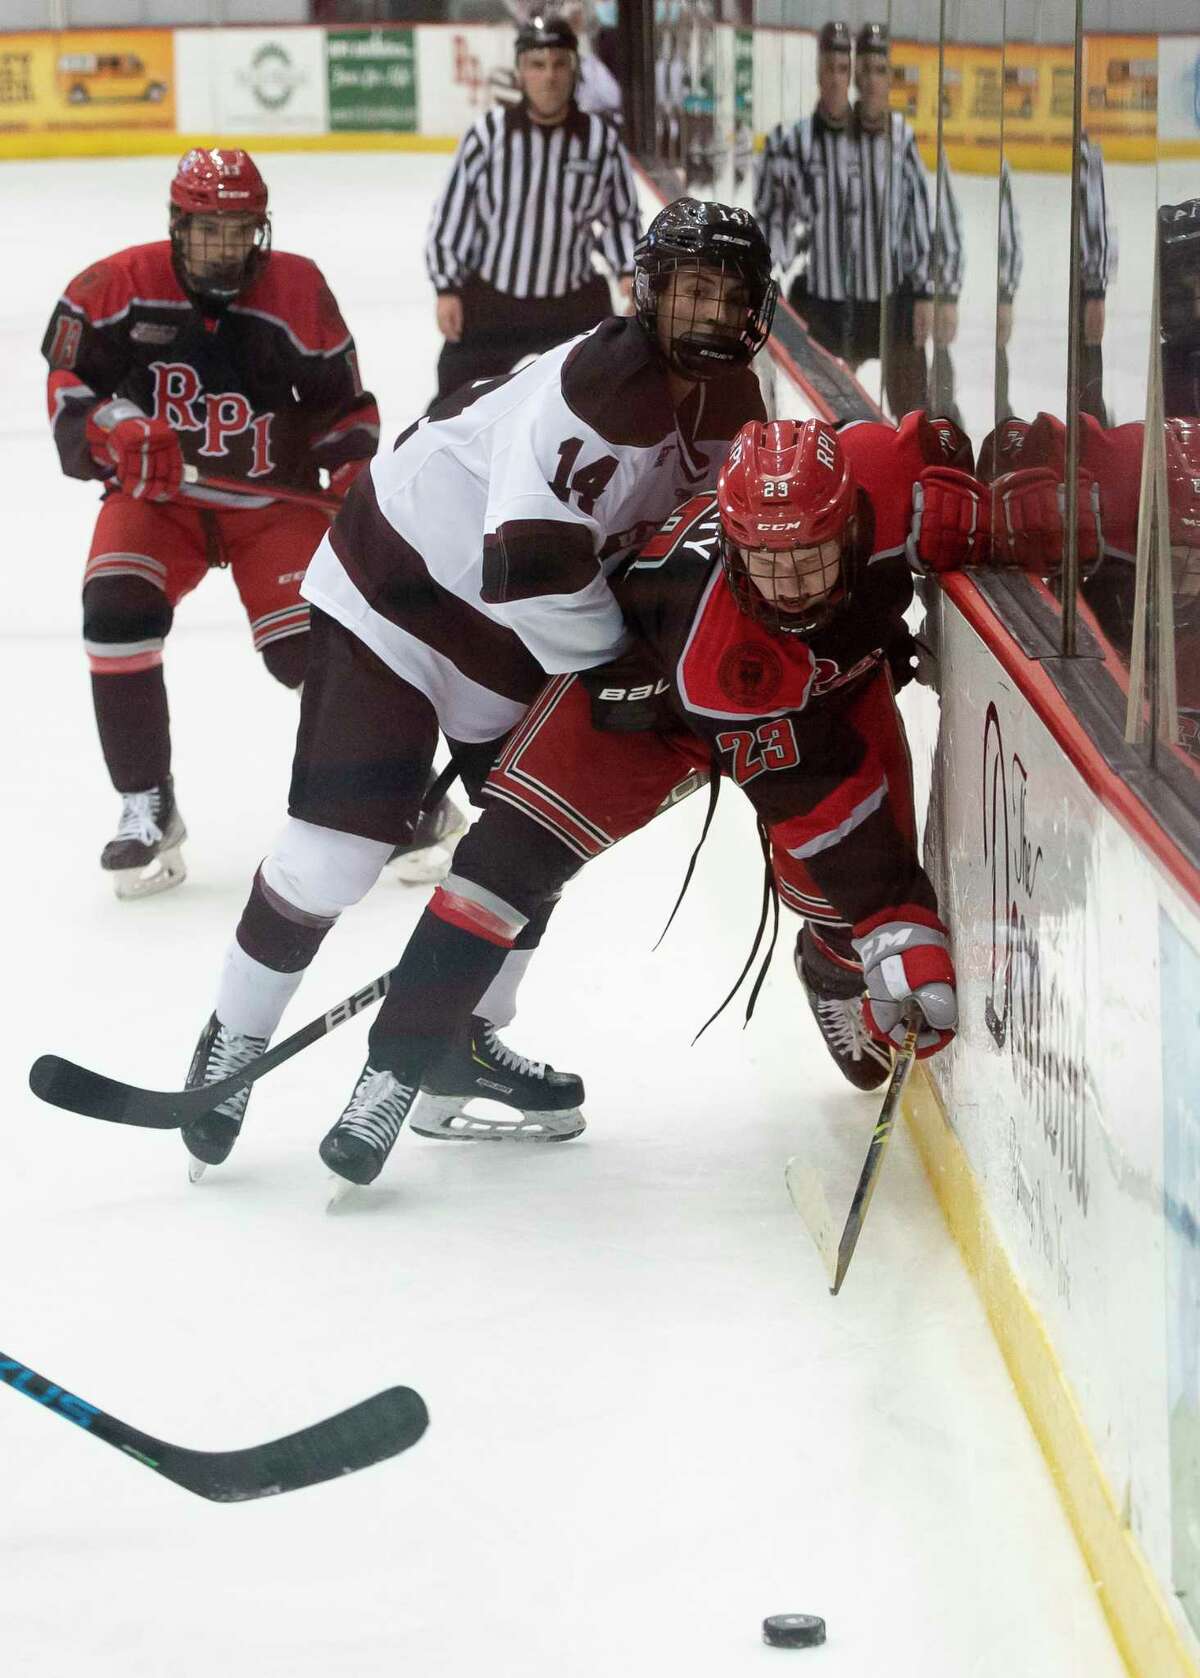 Union forward Andrew Seaman checks RPI defenseman Jake Johnson on Oct. 30. The first-year forward has four points in 12 games for the Dutchmen.